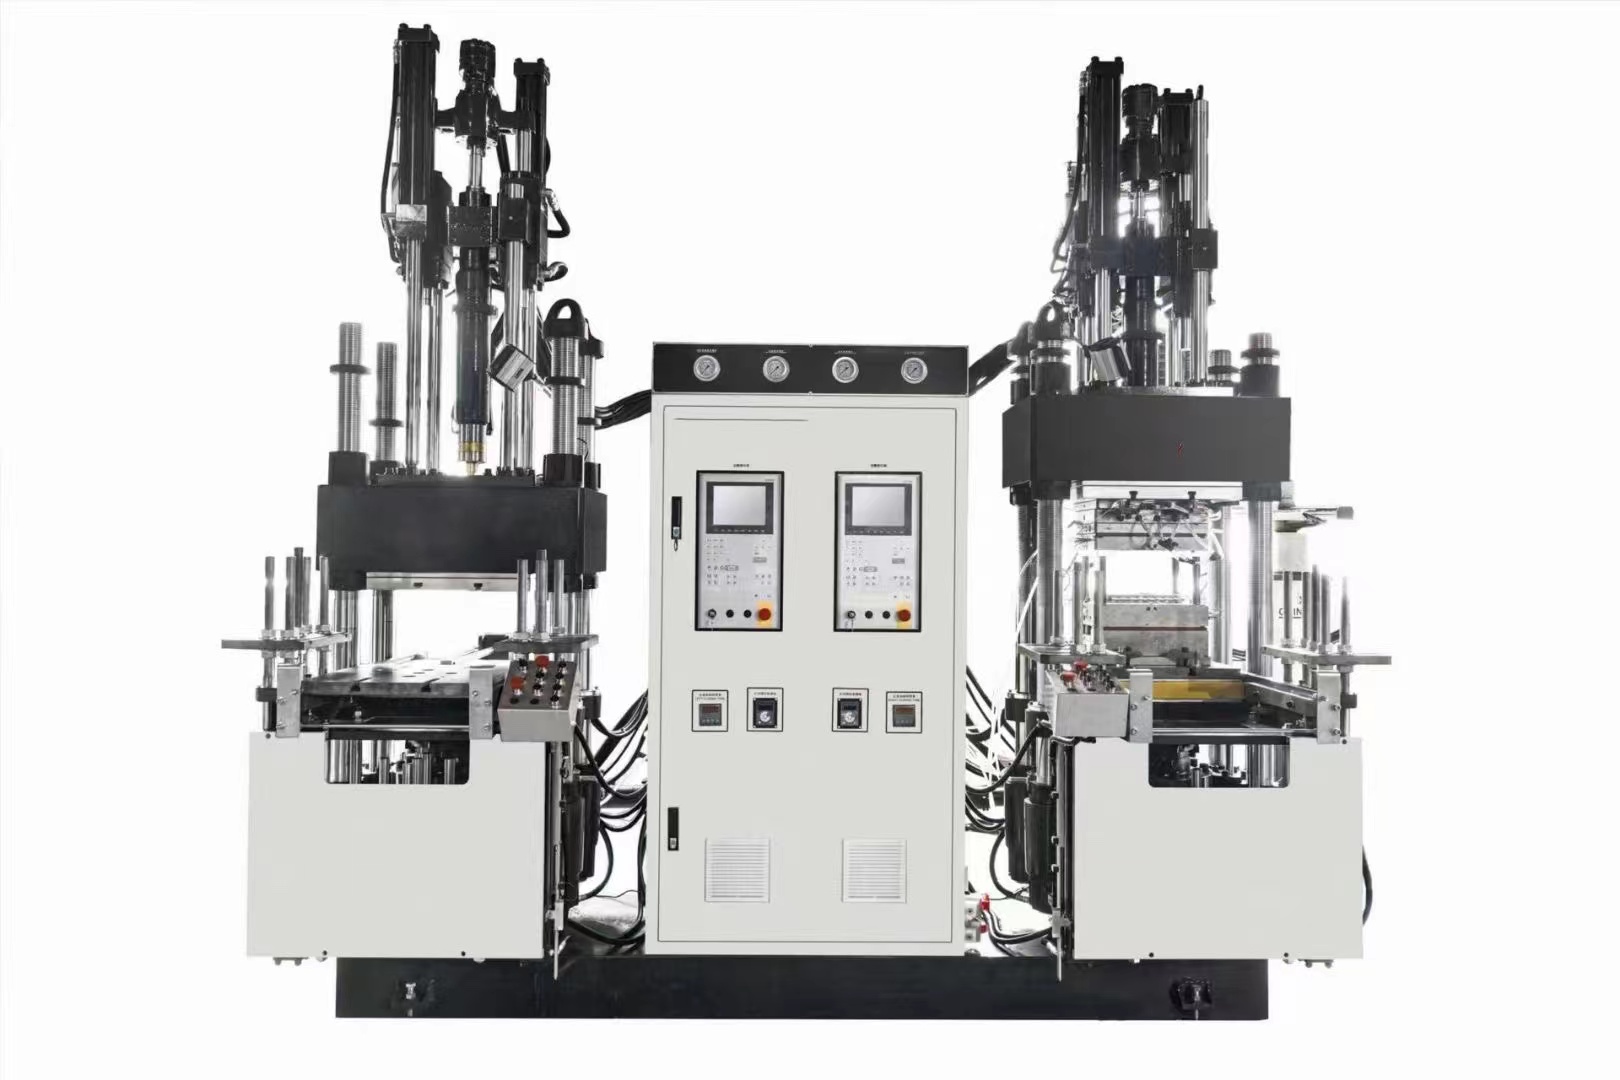 What's the LSR Injection Molding Machine Features?